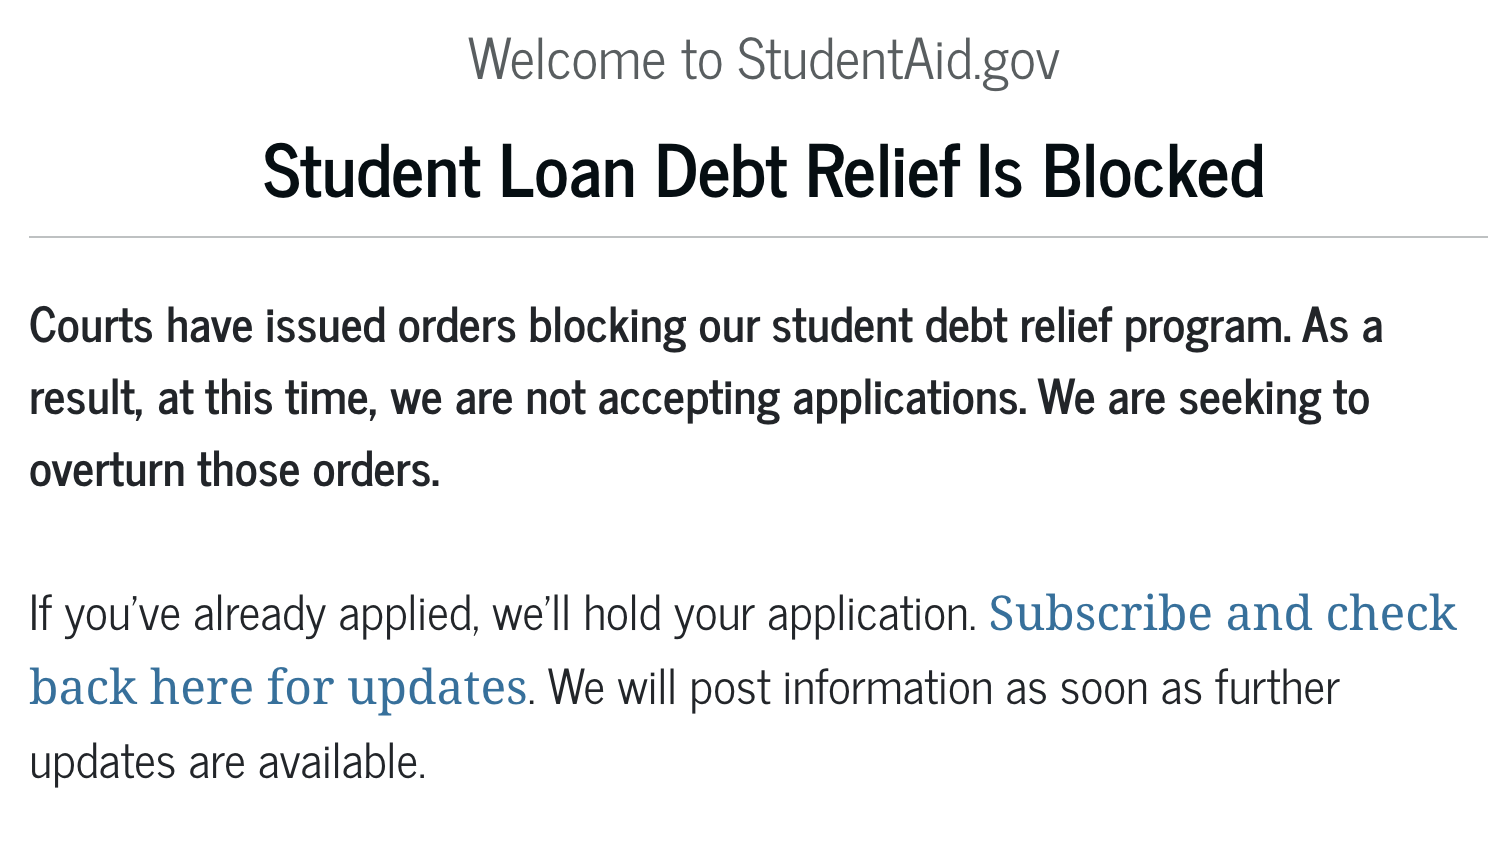 The message that now greets you on the student loan forgiveness website